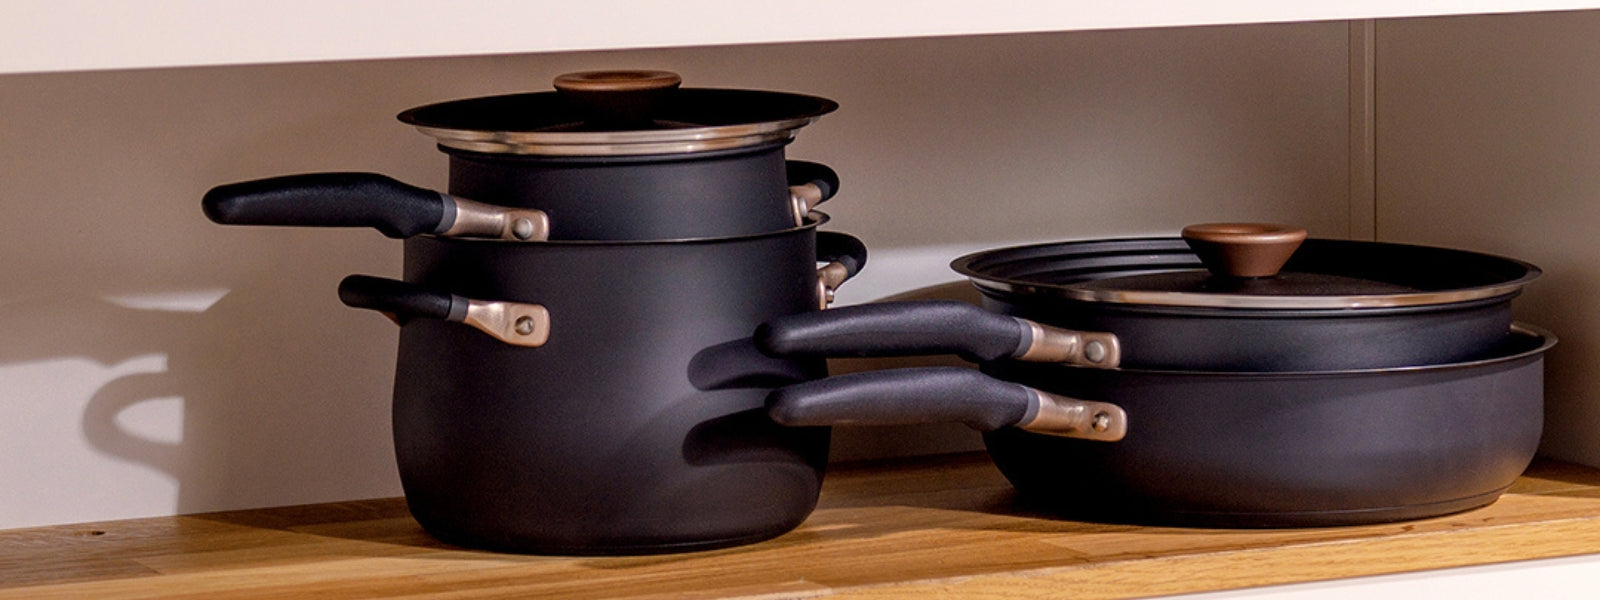 Tips and tricks to declutter pots and pans in your kitchen | Desi Kitchen